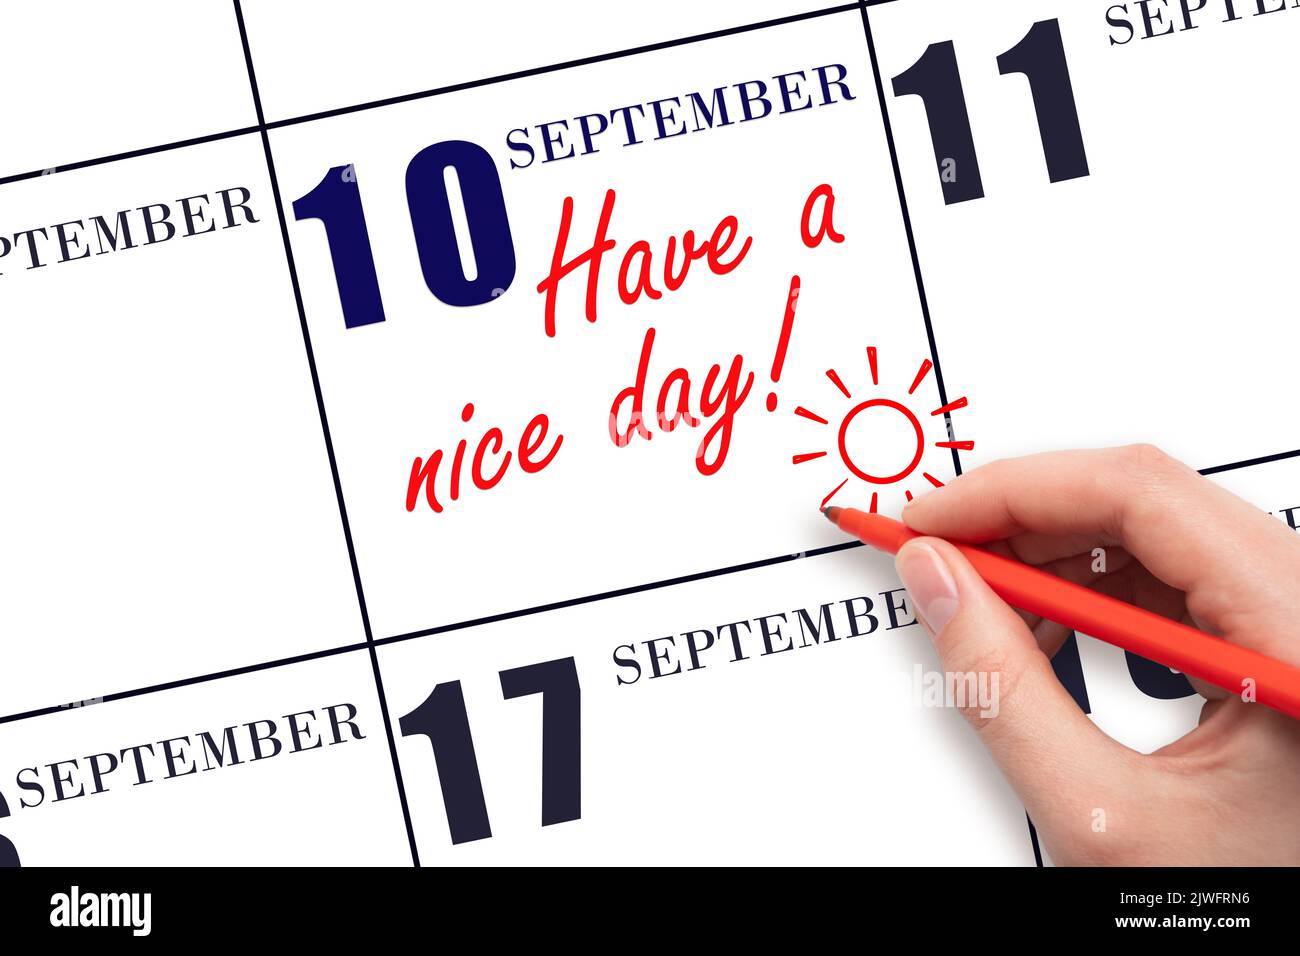 10th day of September. The hand writing the text Have a nice day and drawing the sun on the calendar date September  10. Save the date. Autumn month, Stock Photo